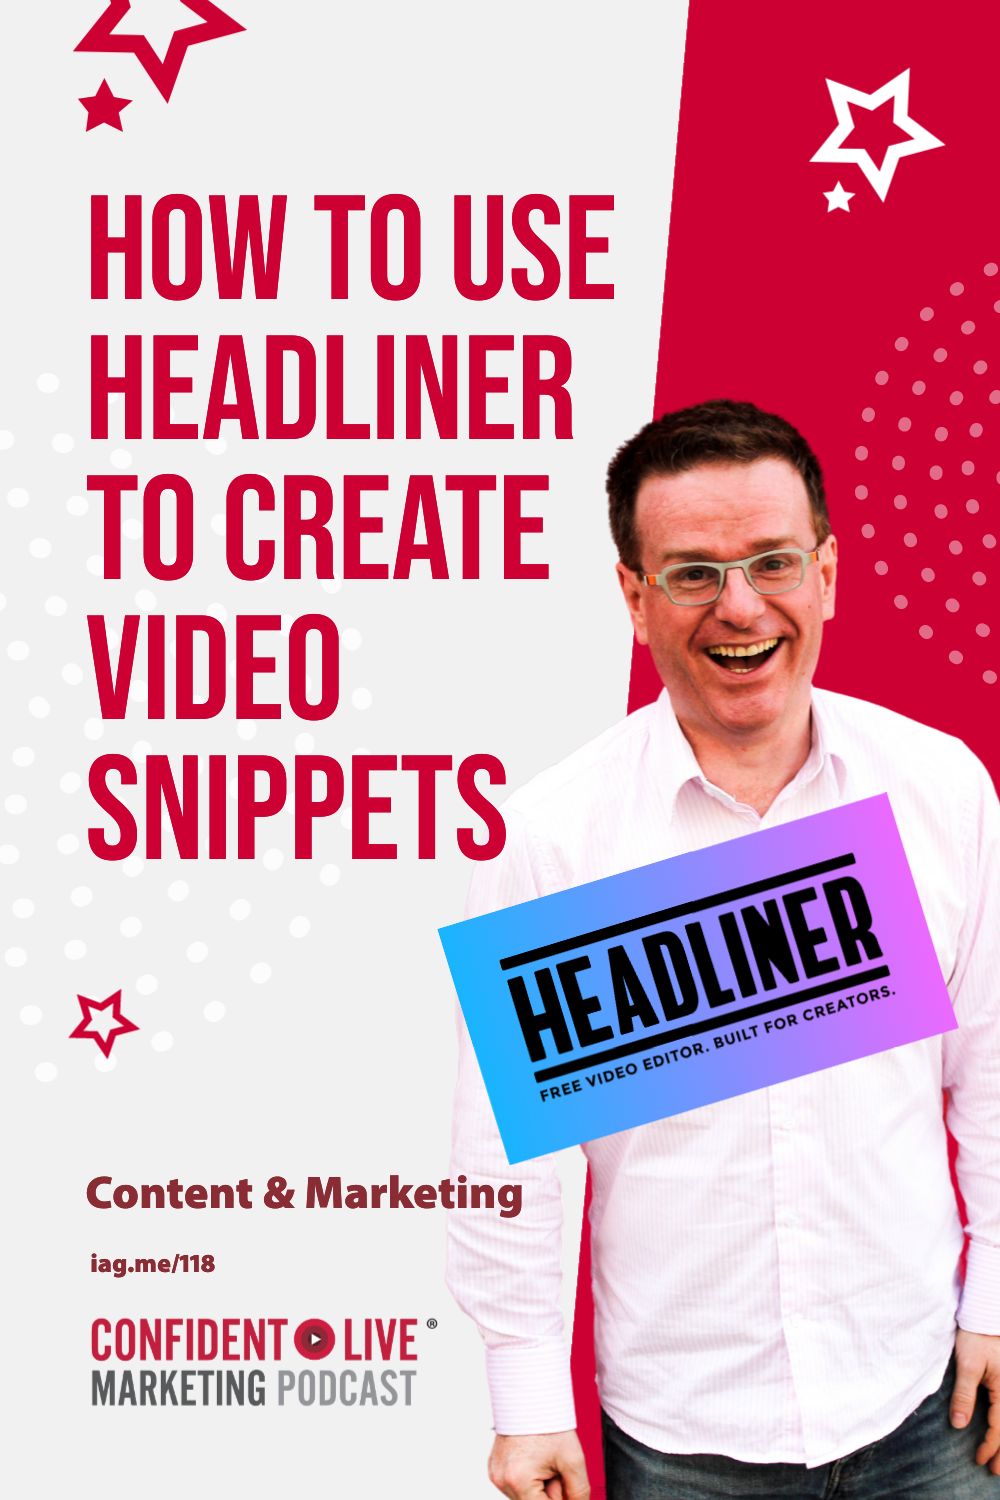 How to use Headliner to Create Video Snippets